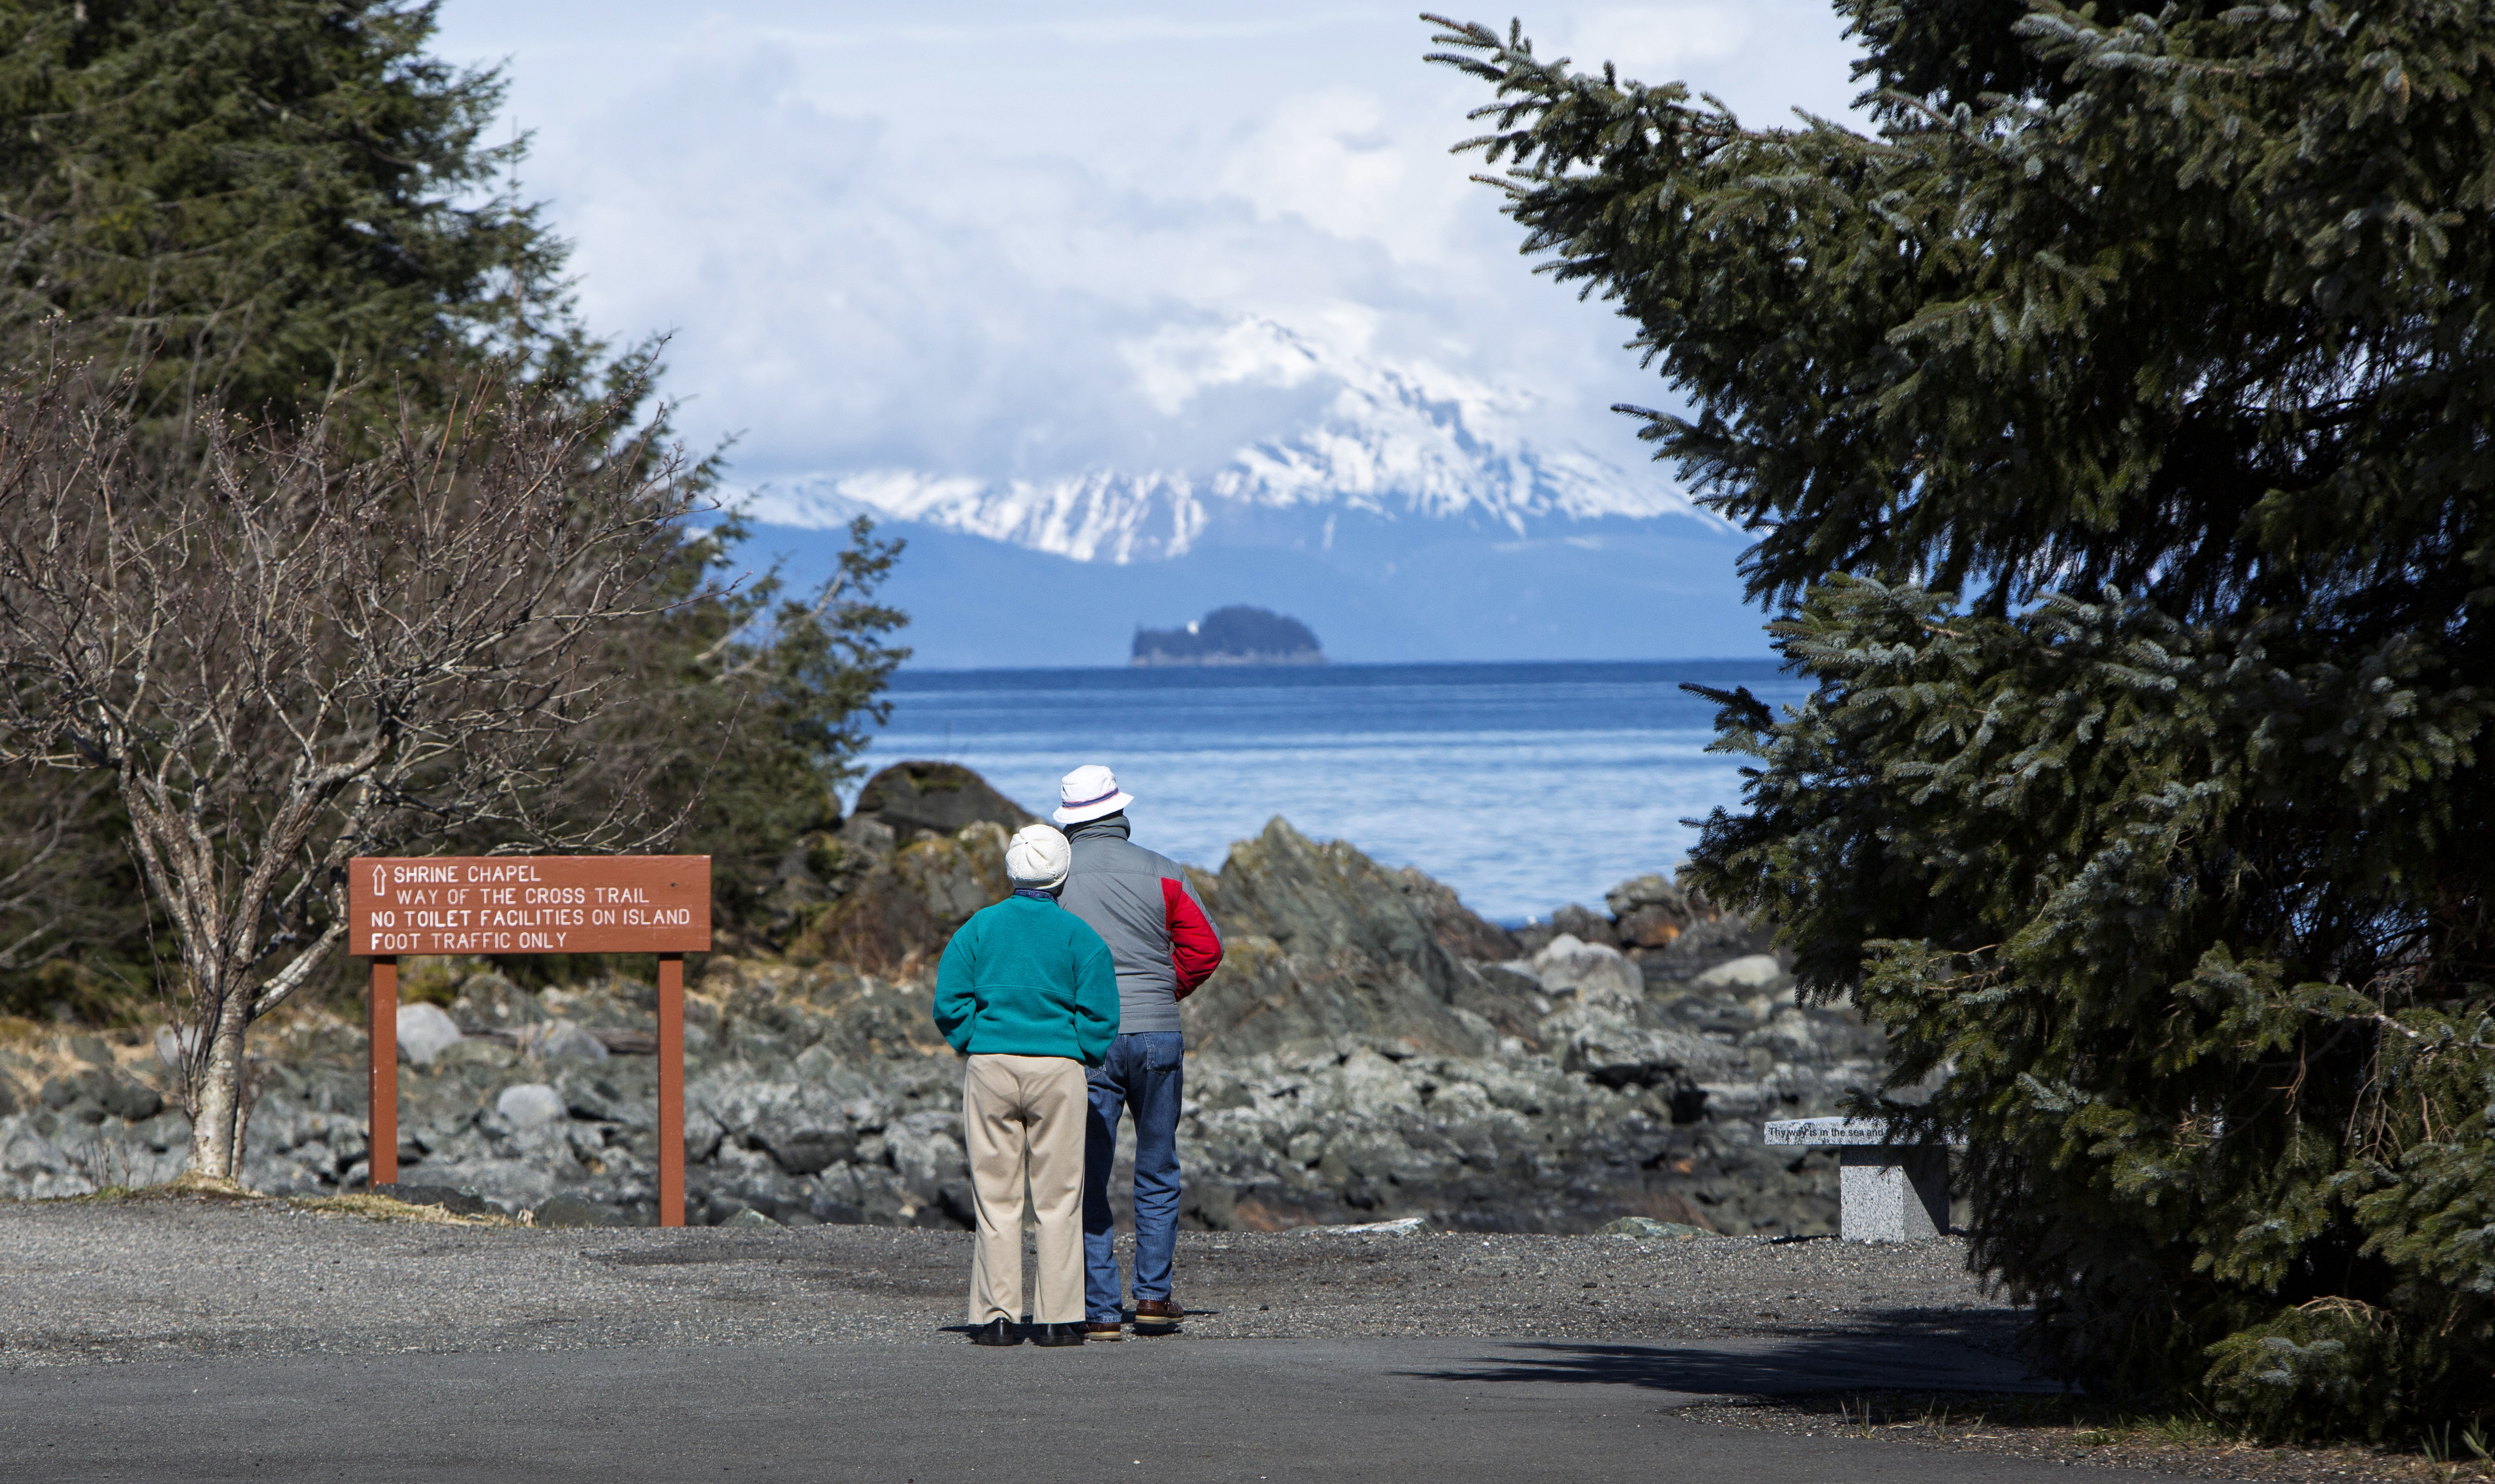 Visitors look out over the water in 2014 at the Shrine of St. Thérèse in Juneau, Alaska. The place of retreat with breathtaking views was designated a national shrine by the U.S. bishops Oct. 1. (CNS photo/Nancy Wiechec)